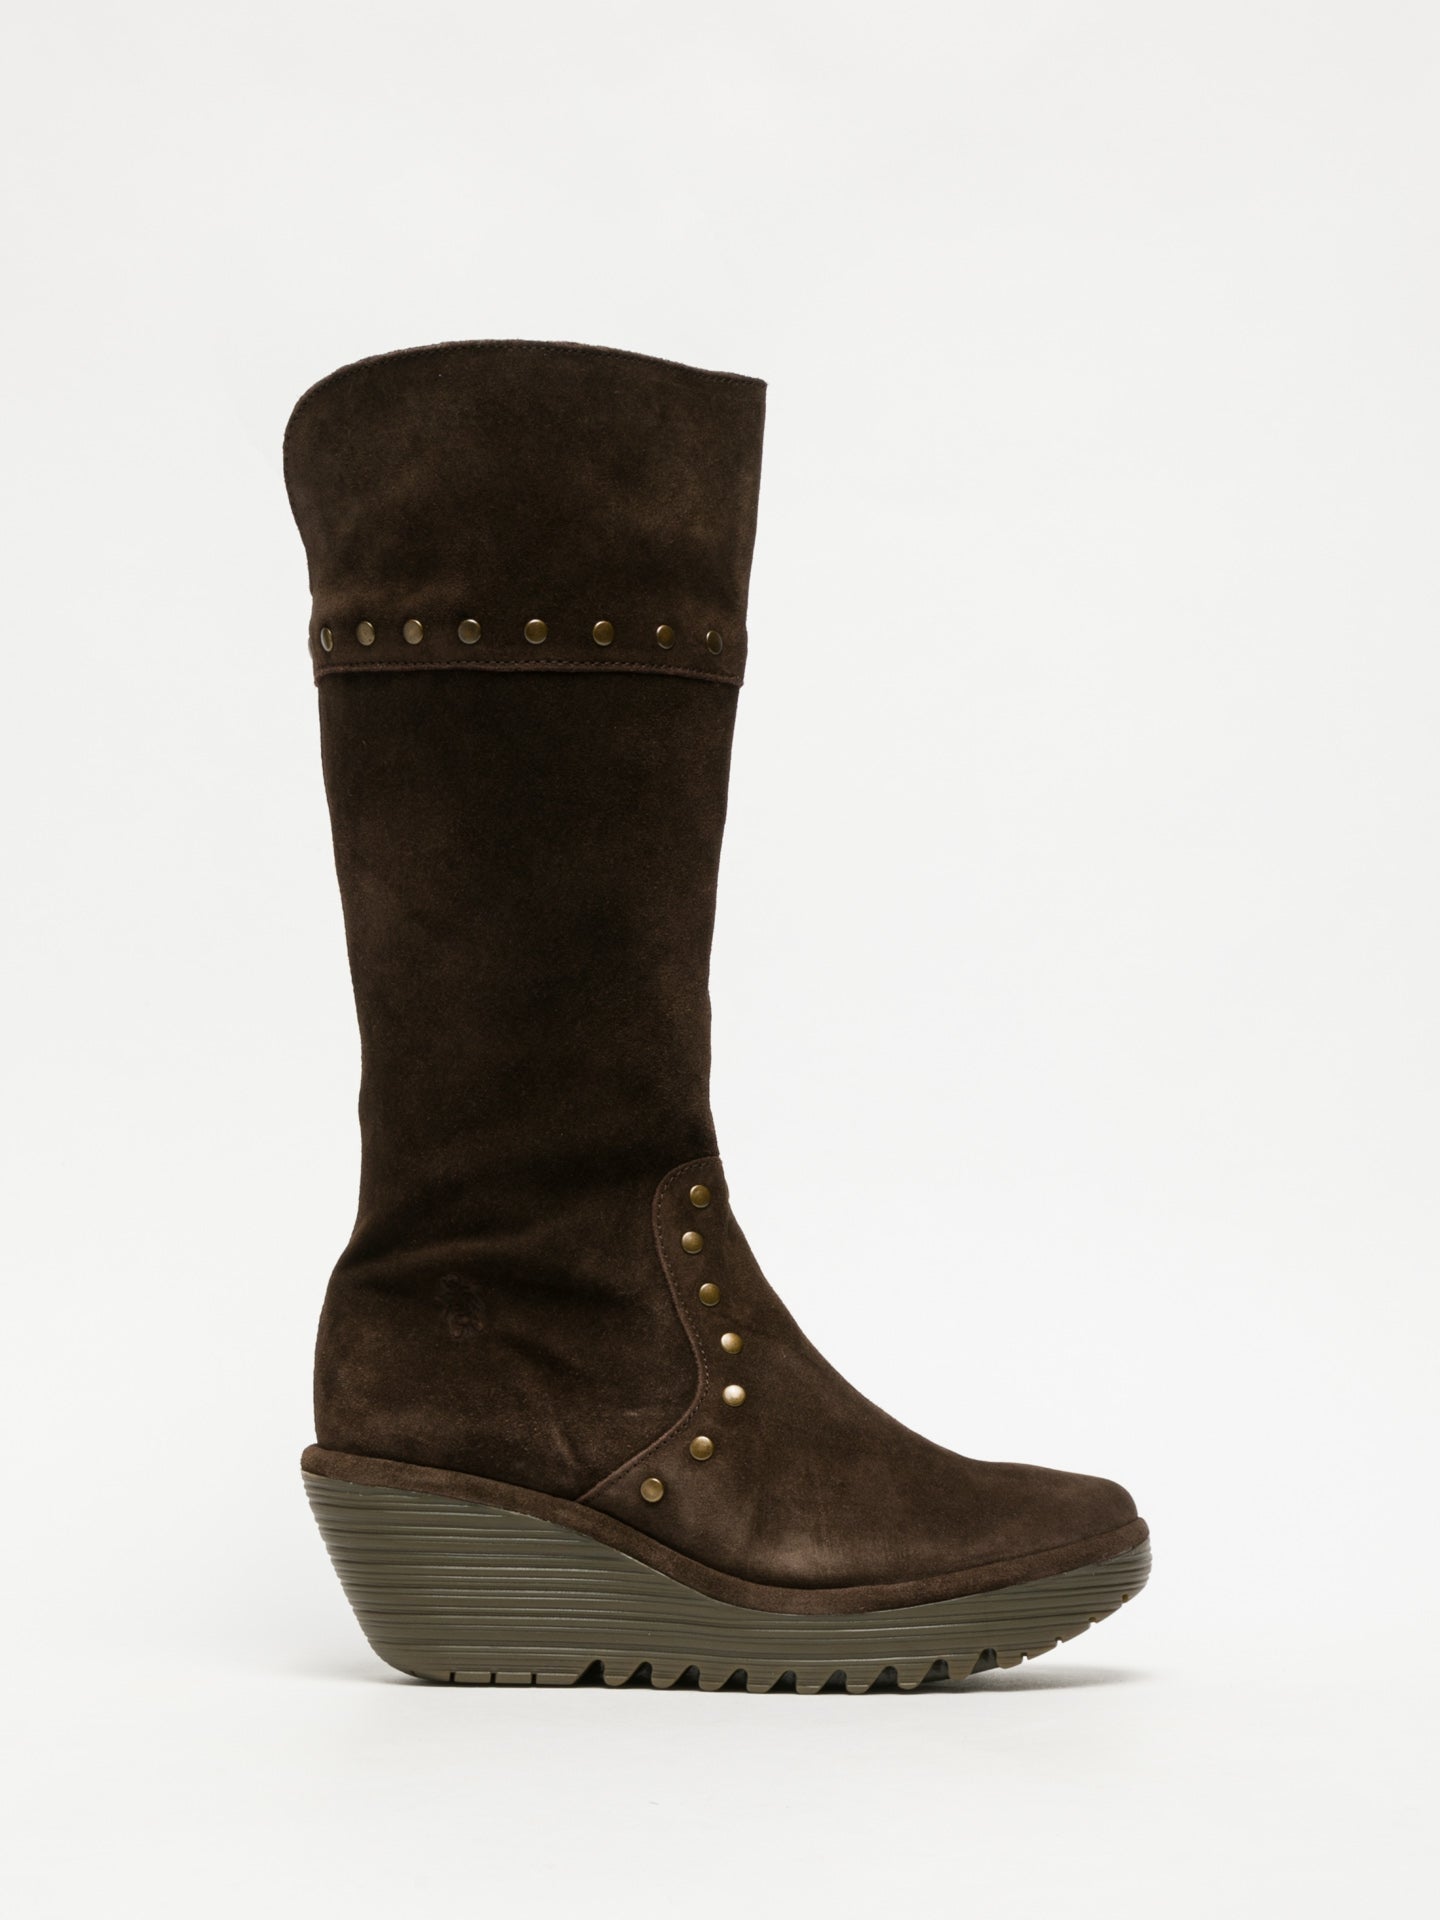 Fly London Brown Studded Boots